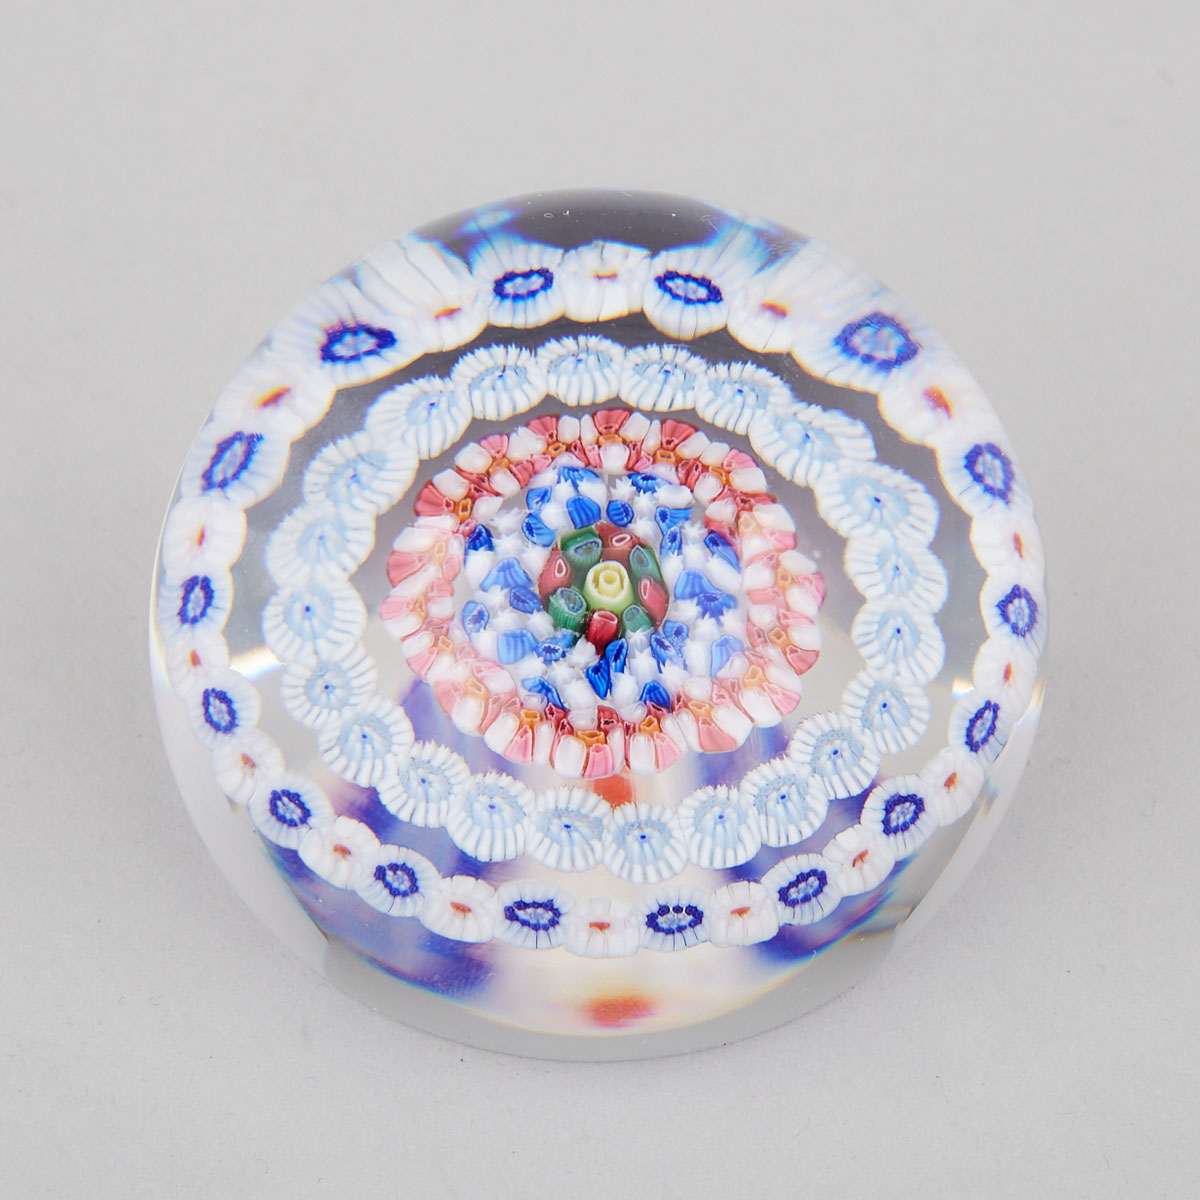 Baccarat Concentric Millefiori Glass Paperweight, 20th century